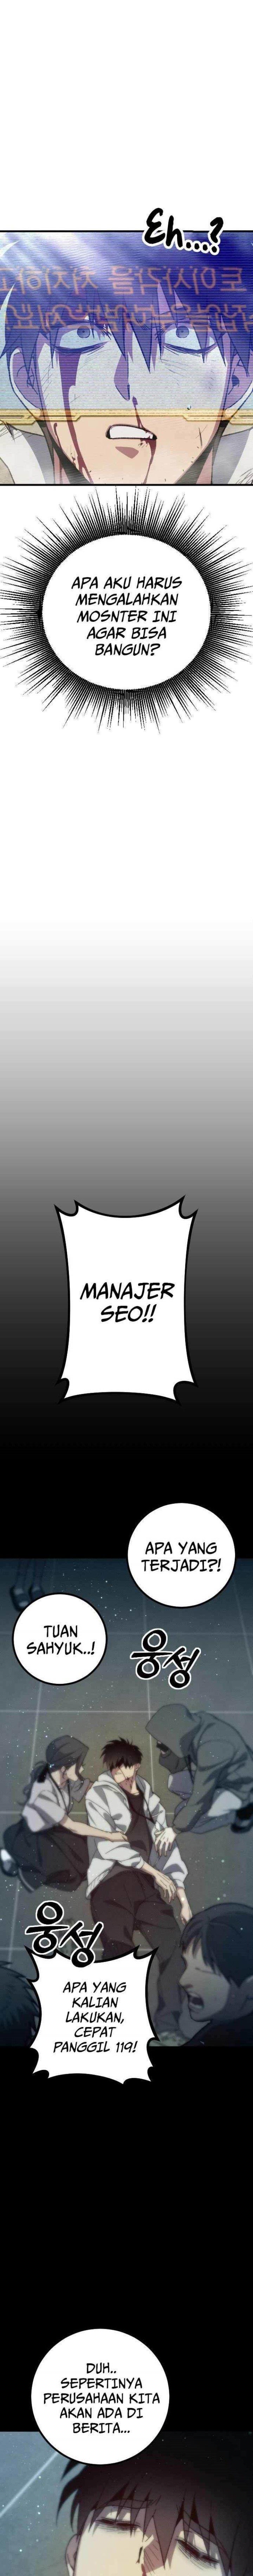 Manager Seo Industrial Accident Chapter 1